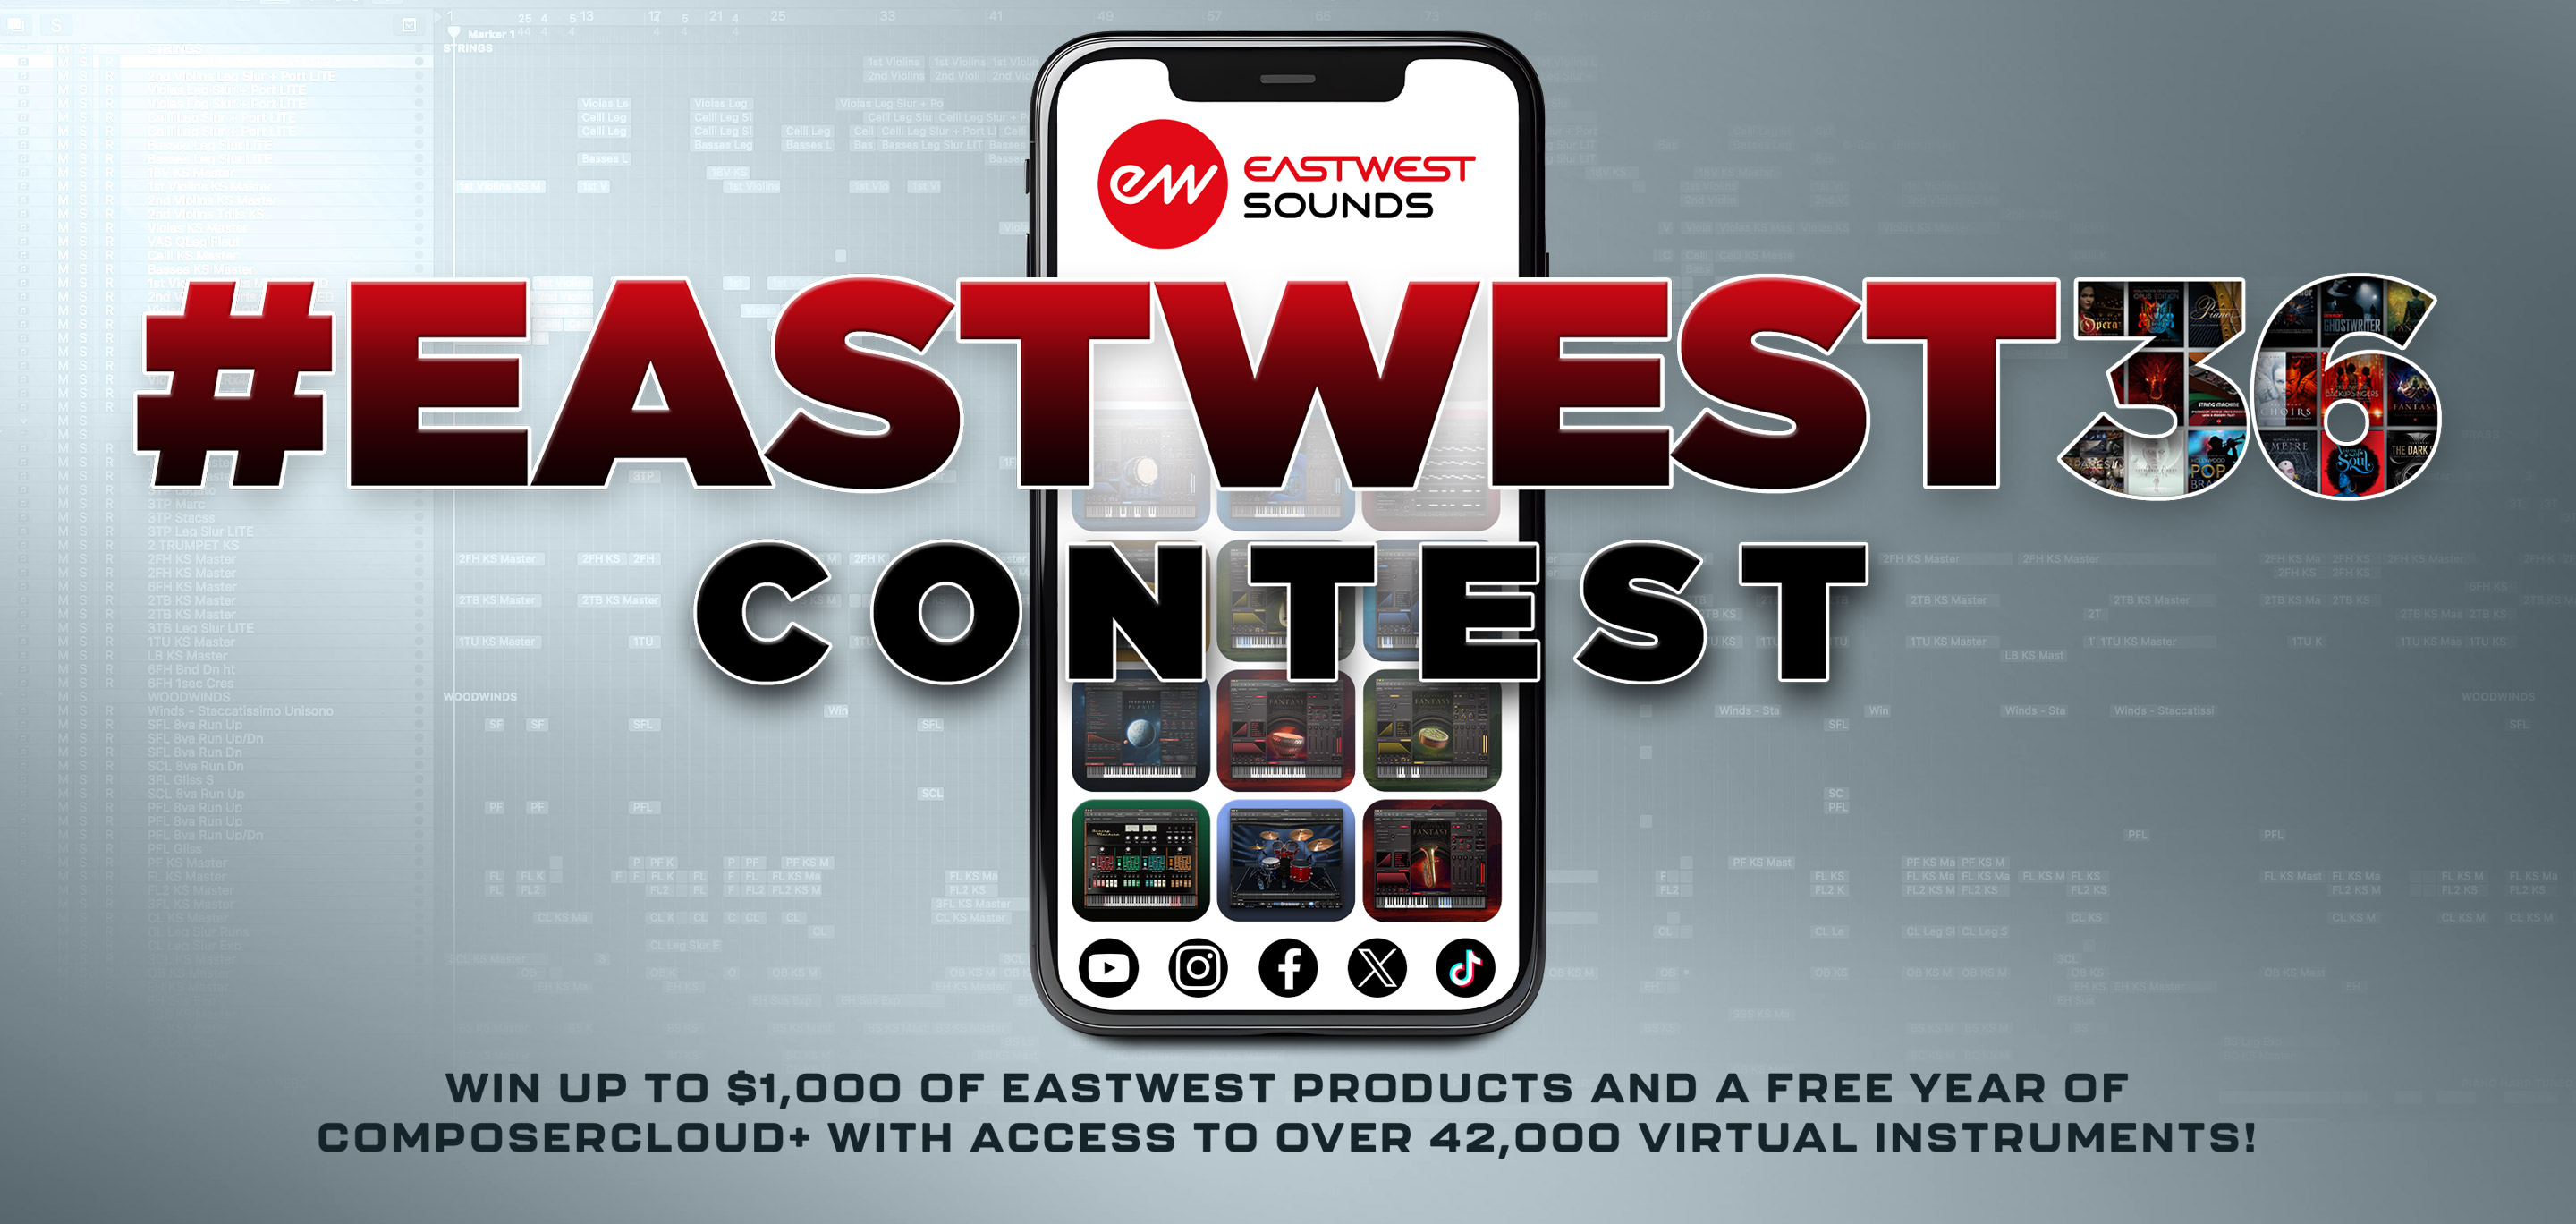 EastWest 36 Contest - Enter to win up to $1,000 of EastWest Products and a Free Year of ComposerCloud+